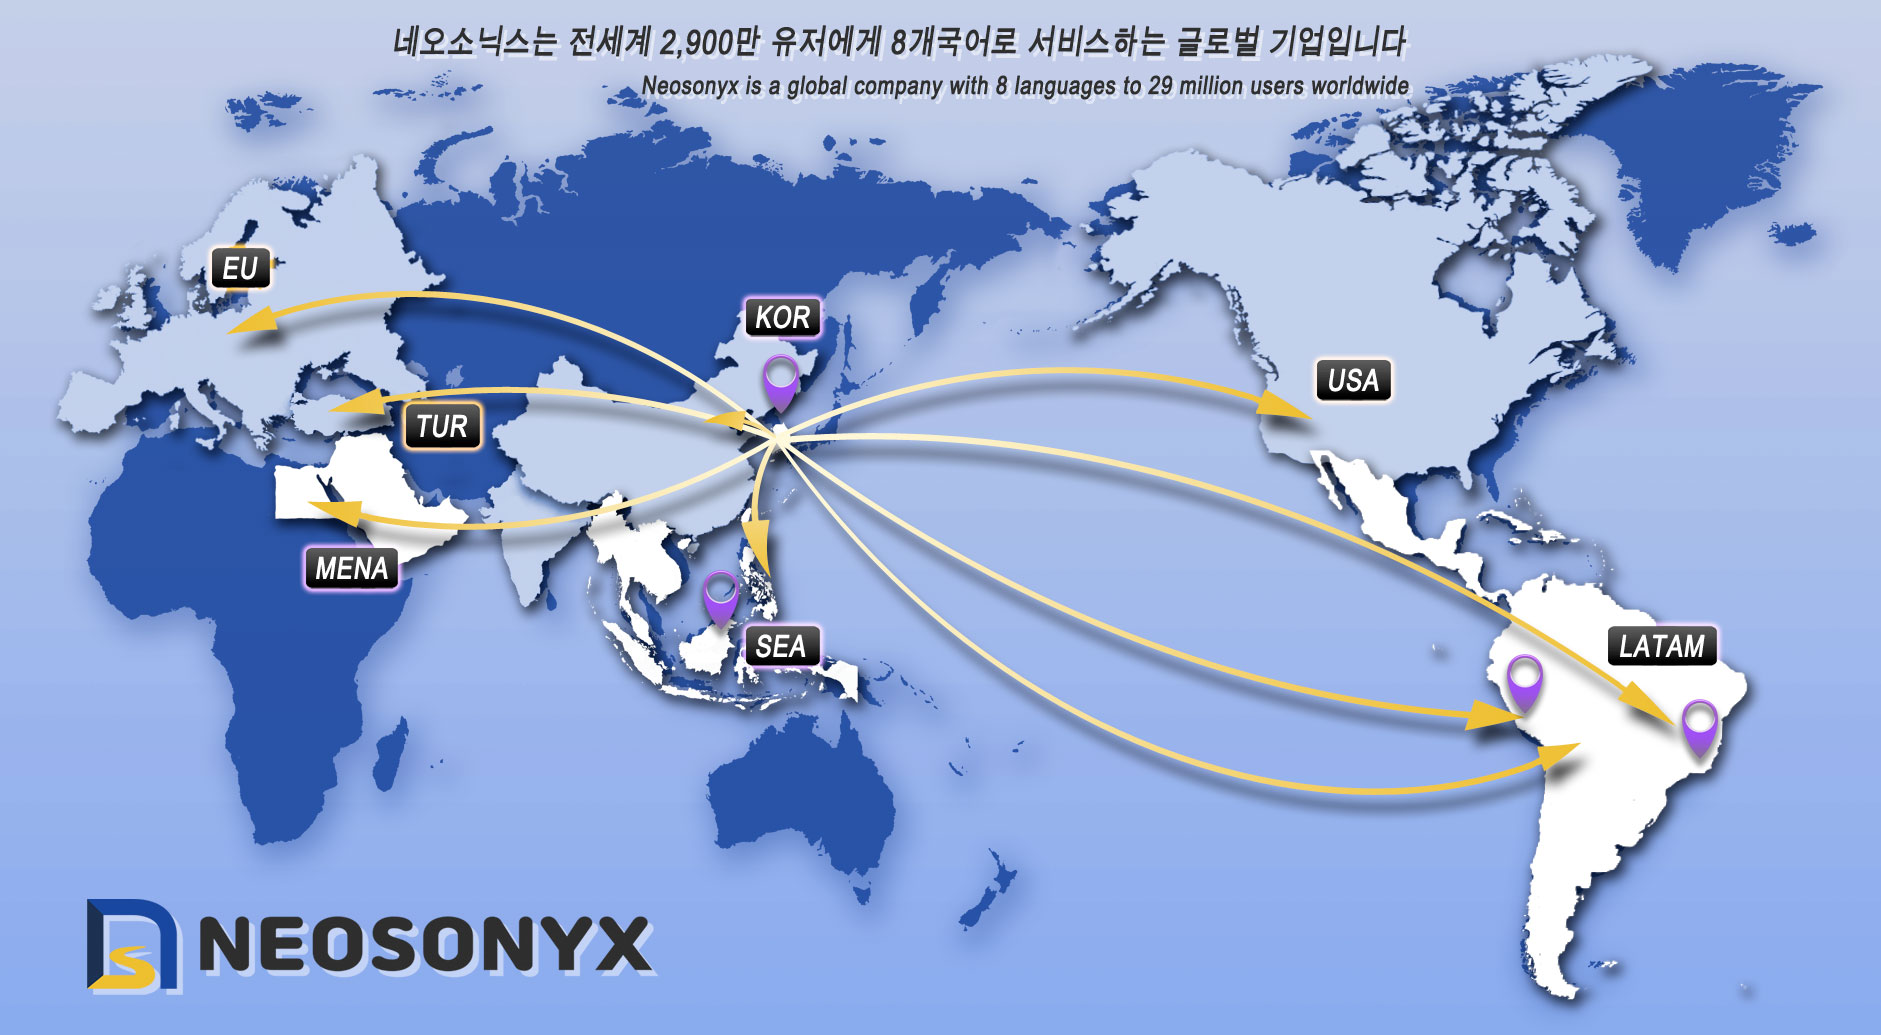 Neosonyx is a global company with 8 language to 29 million users worldwide.